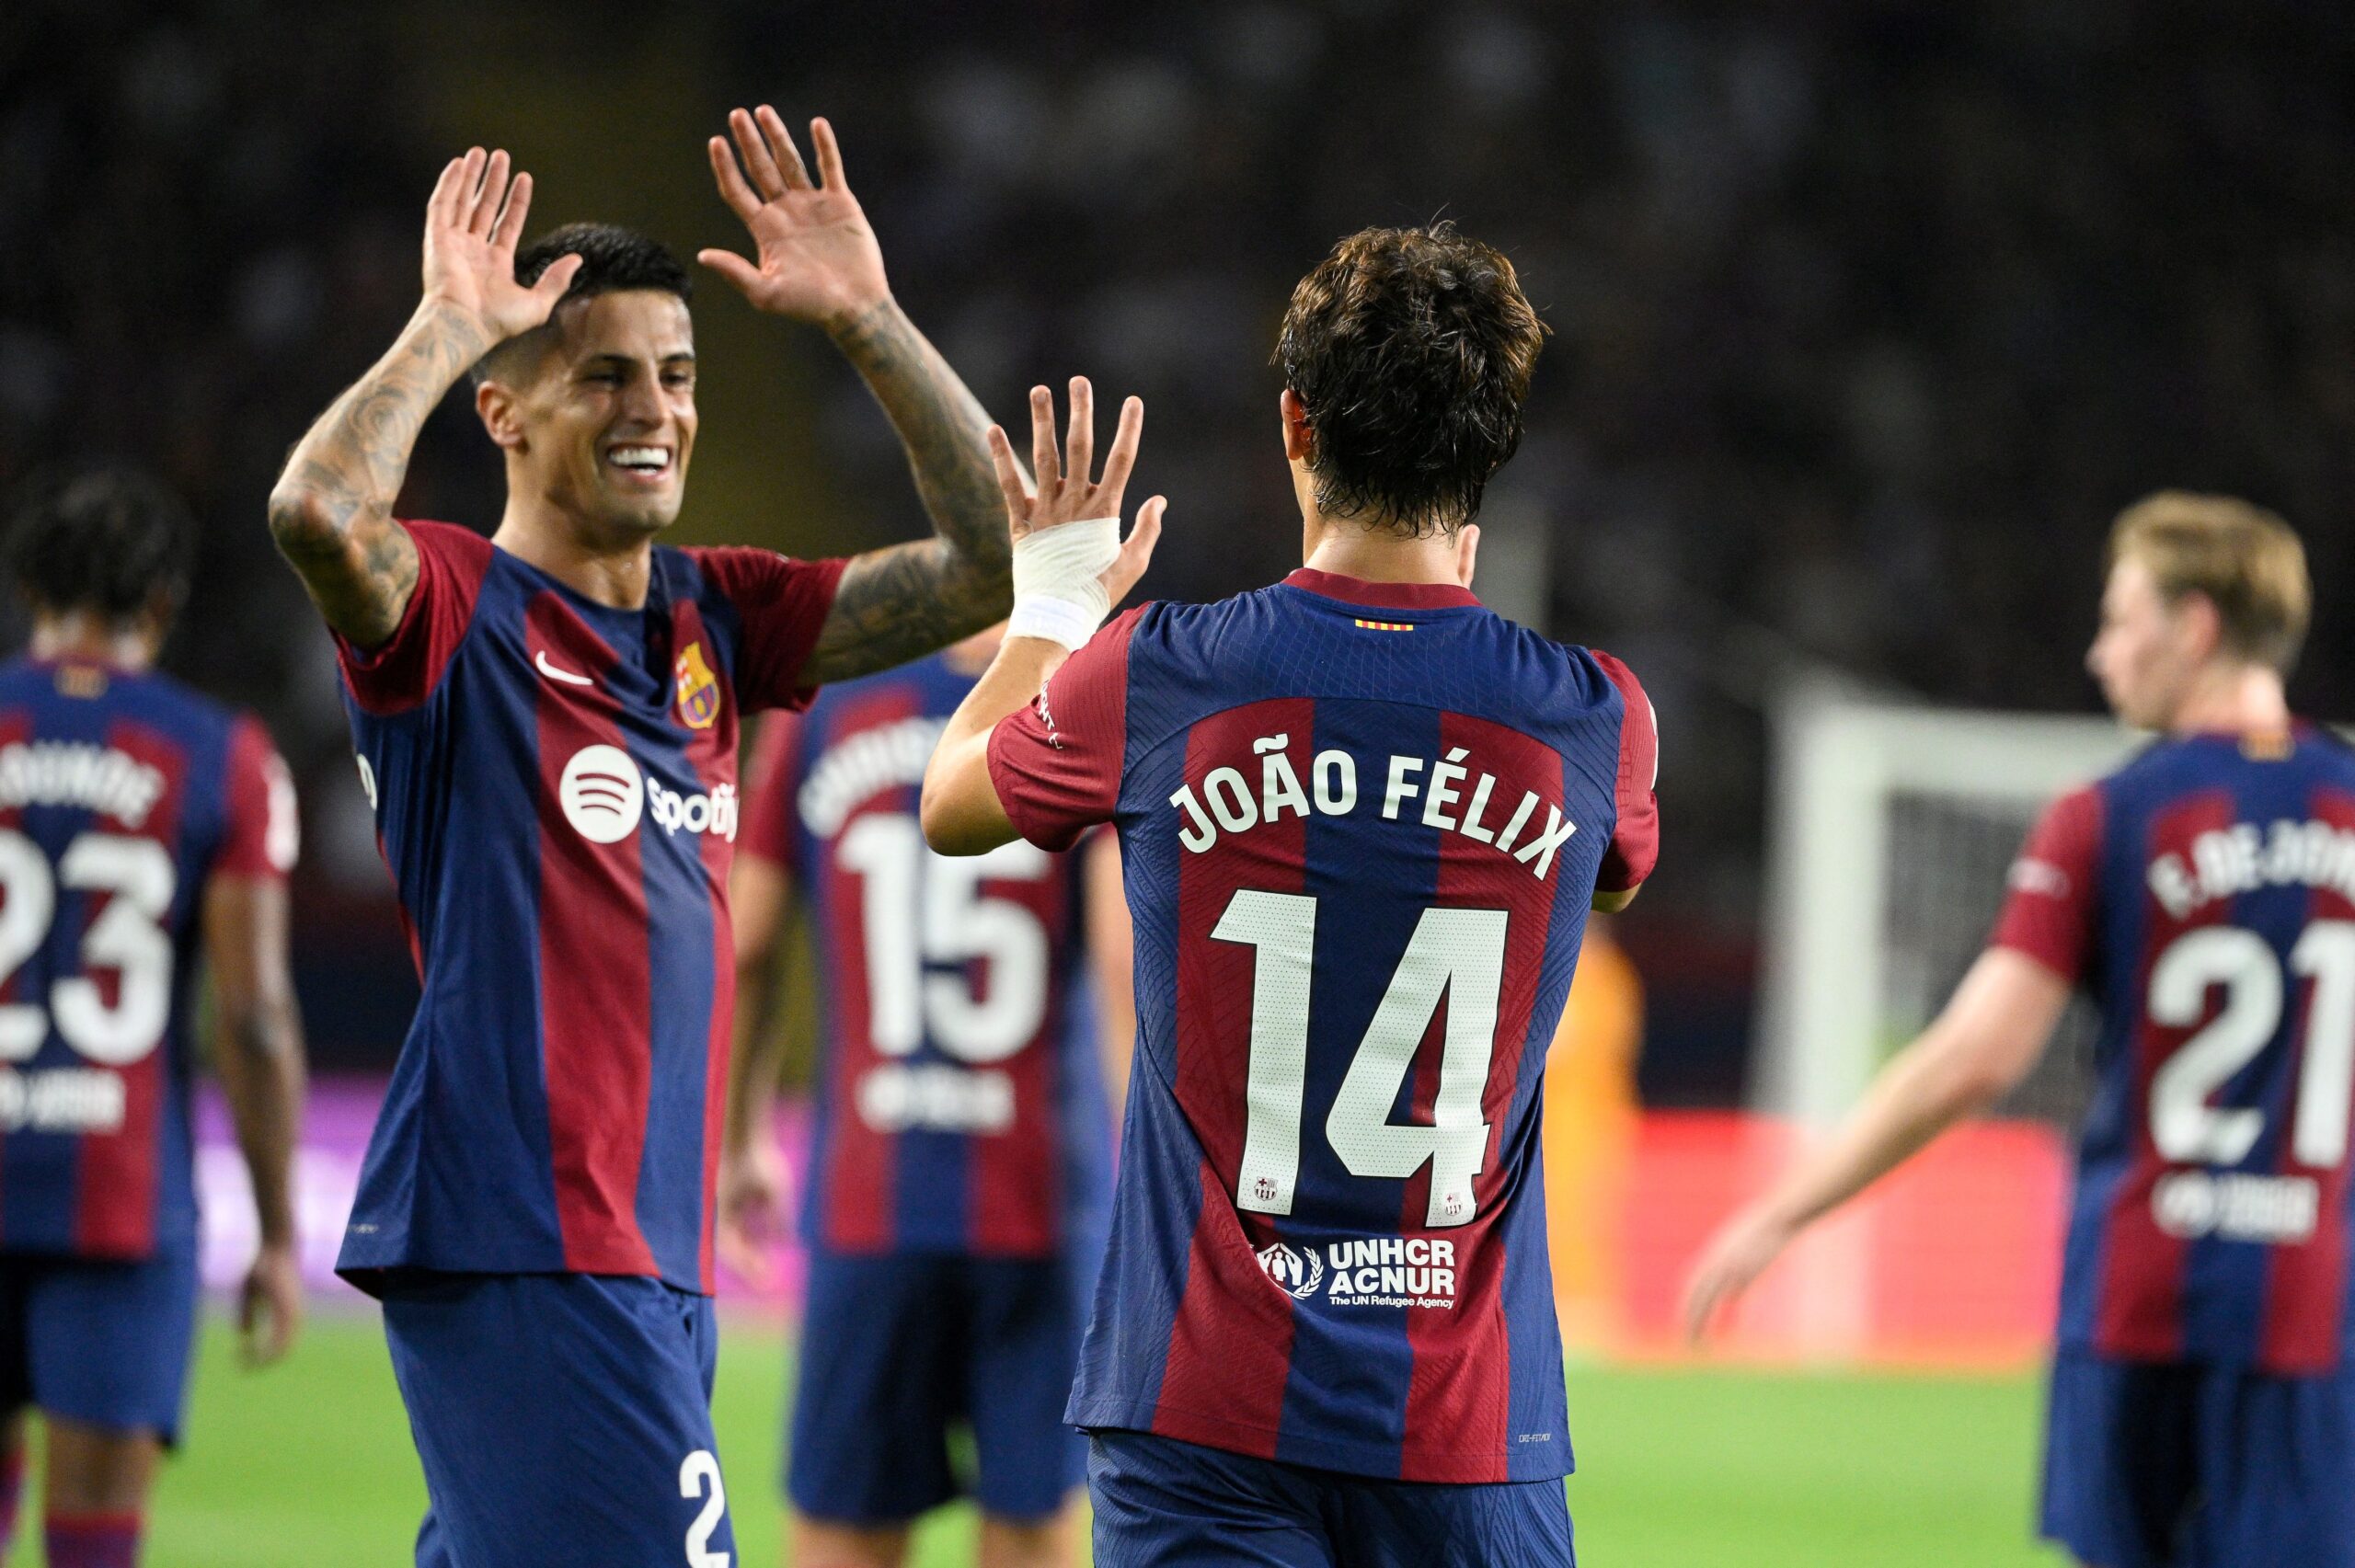 Barcelona's Portuguese forward #14 Joao Felix celebrates with Barcelona's Portuguese defender #02 Joao Cancelo after scoring his team's first goal during the Spanish Liga football match between FC Barcelona and Real Betis at the Estadi Olimpic Lluis Companys in Barcelona on September 16, 2023.